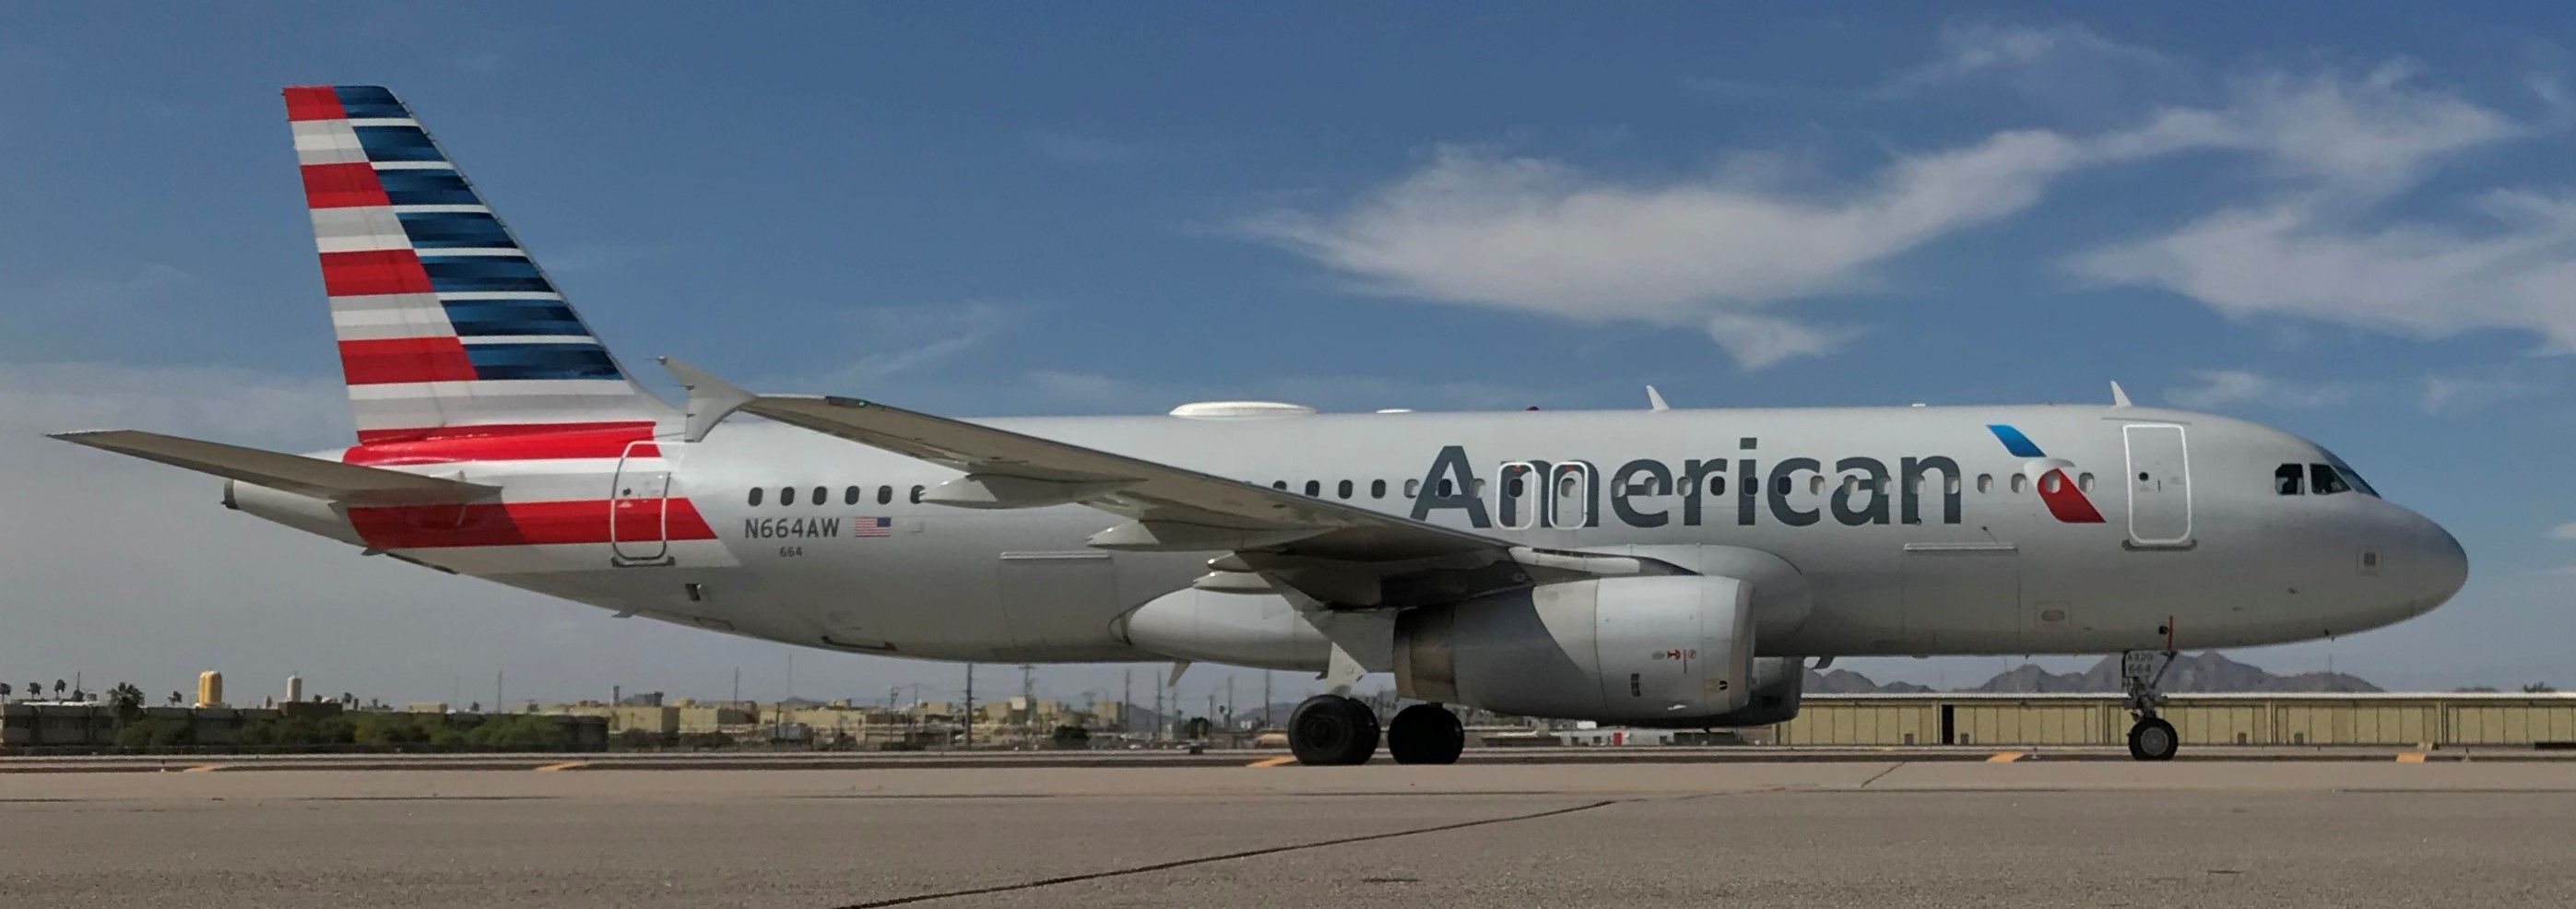 Airbus A320 (N664AW) - phoenix sky harbor international airport terminal 4 taxiway Charlie arrival 09apr19